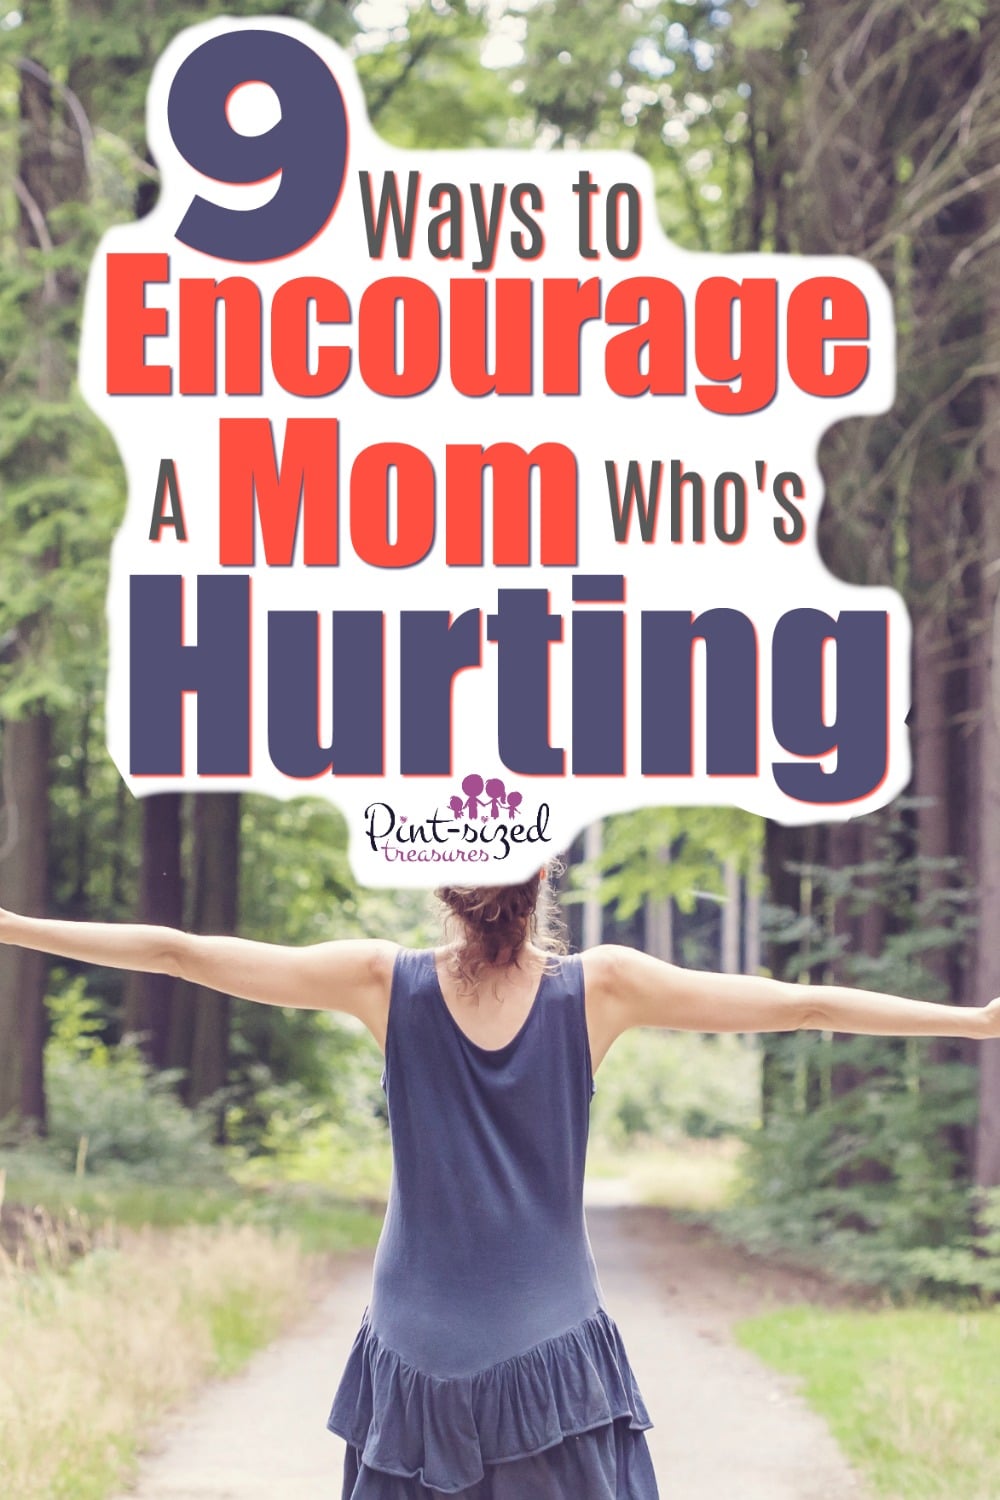 Know a mom who's hurting? She needs encouragement!